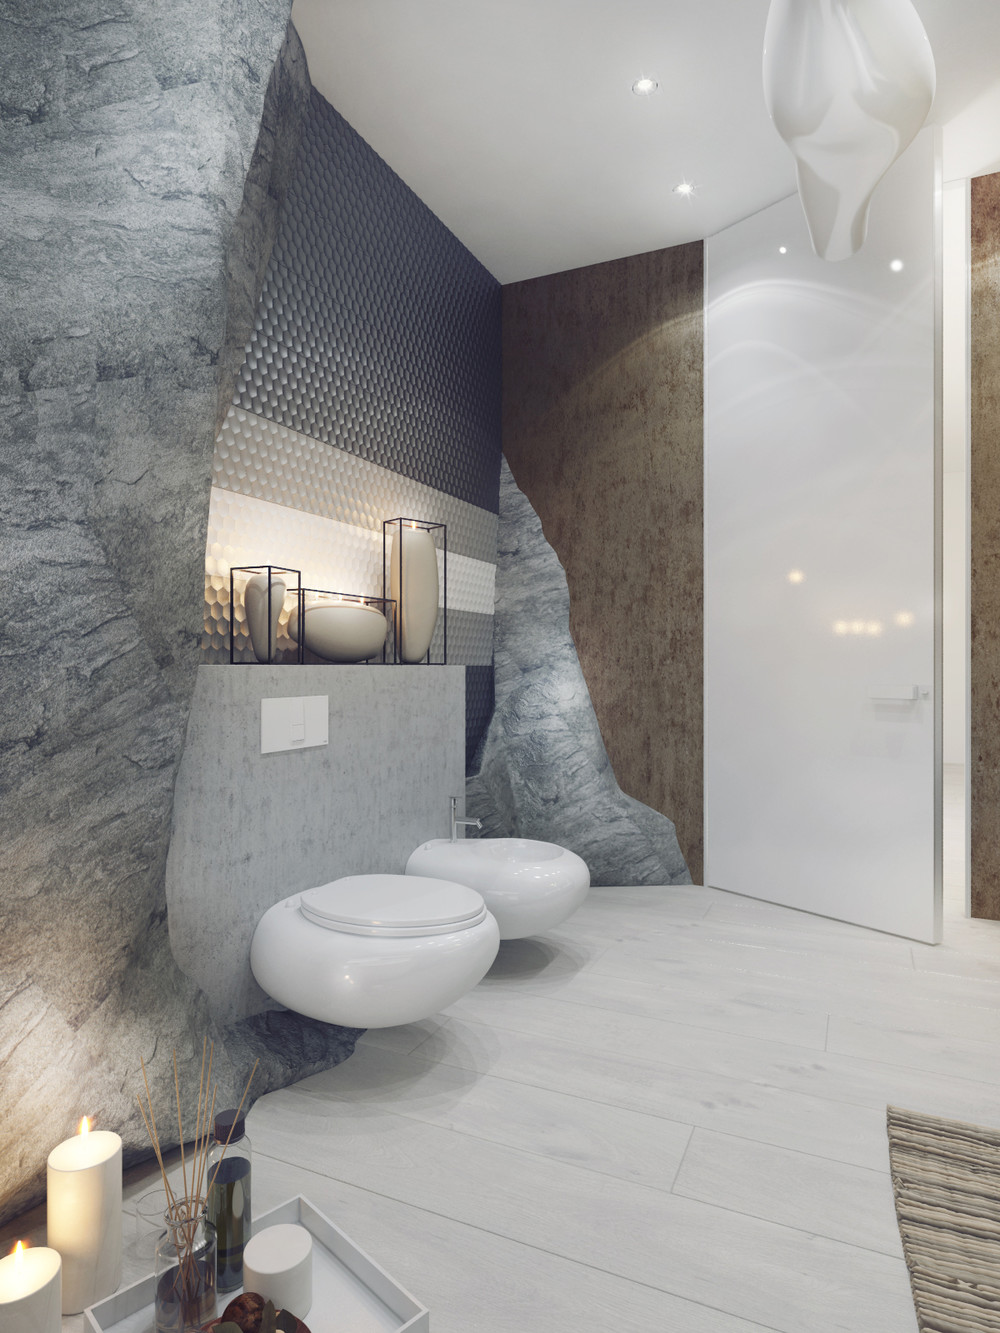 Creative bathroom designs "width =" 1000 "height =" 1333 "srcset =" https://mileray.com/wp-content/uploads/2020/05/1588514867_33_Luxury-Bathroom-Designs-In-High-Details-With-Creative-Decor-Ideas.jpg 1000w, https: / /mileray.com/wp-content/uploads/2016/08/Jesters-Philip-and-Catherine2-225x300.jpg 225w, https://mileray.com/wp-content/uploads/2016/08/Jesters-Philip- und-Catherine2-768x1024.jpg 768w, https://mileray.com/wp-content/uploads/2016/08/Jesters-Philip-and-Catherine2-696x928.jpg 696w, https://mileray.com/wp- Content / Uploads / 2016/08 / Jesters-Philip-and-Catherine2-315x420.jpg 315w "Sizes =" (maximum width: 1000px) 100vw, 1000px